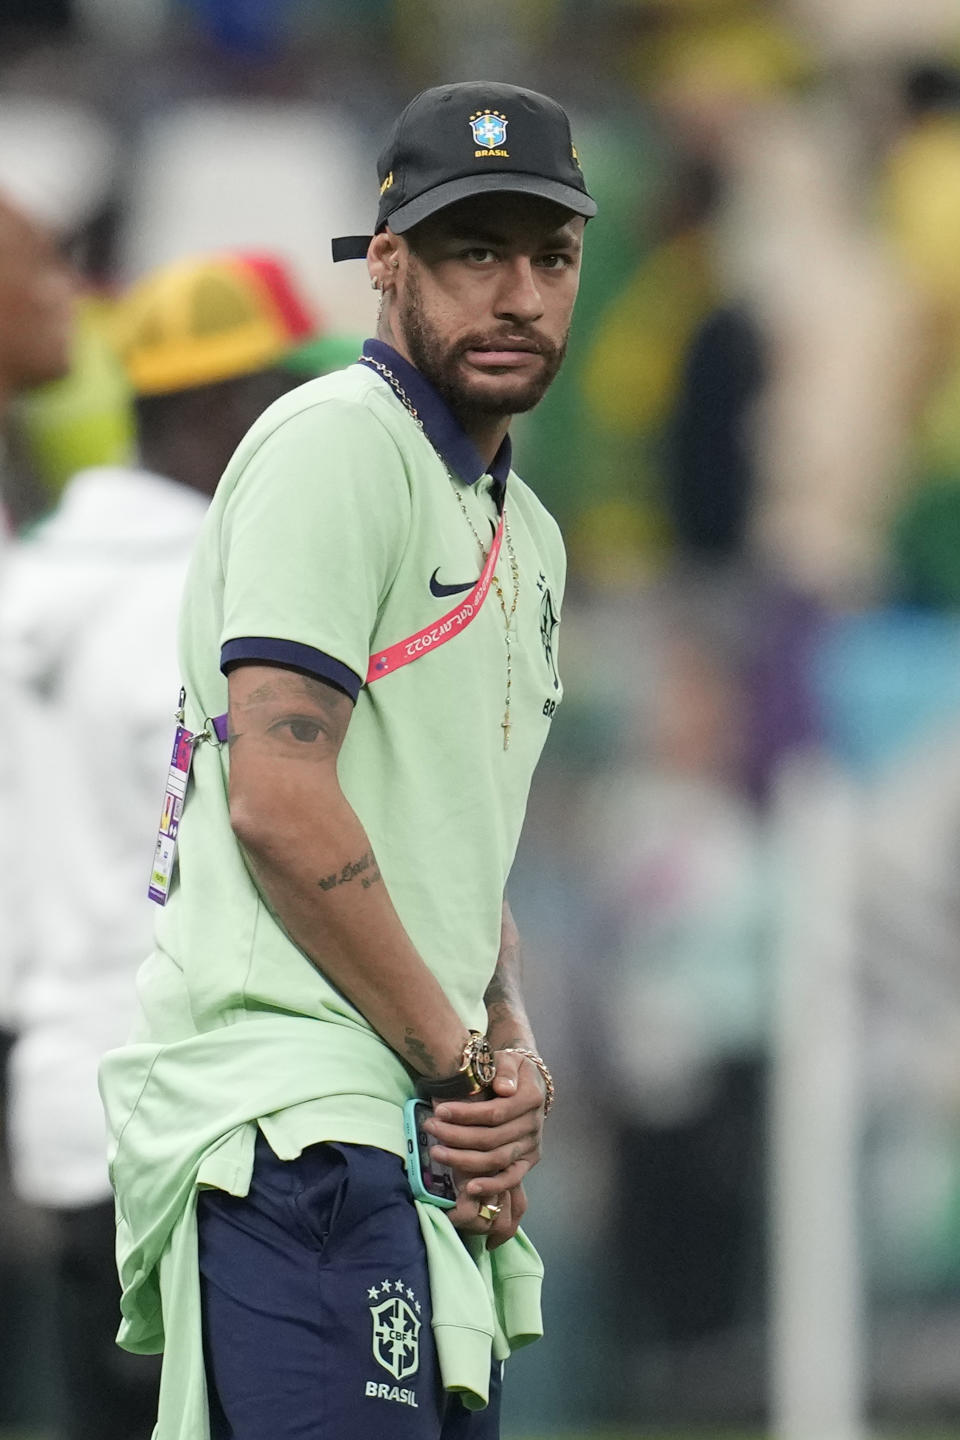 Brazil's Neymar gestures as he attends the World Cup group G soccer match between Cameroon and Brazil, at the Lusail Stadium in Lusail, Qatar, Friday, Dec. 2, 2022. (AP Photo/Natacha Pisarenko)